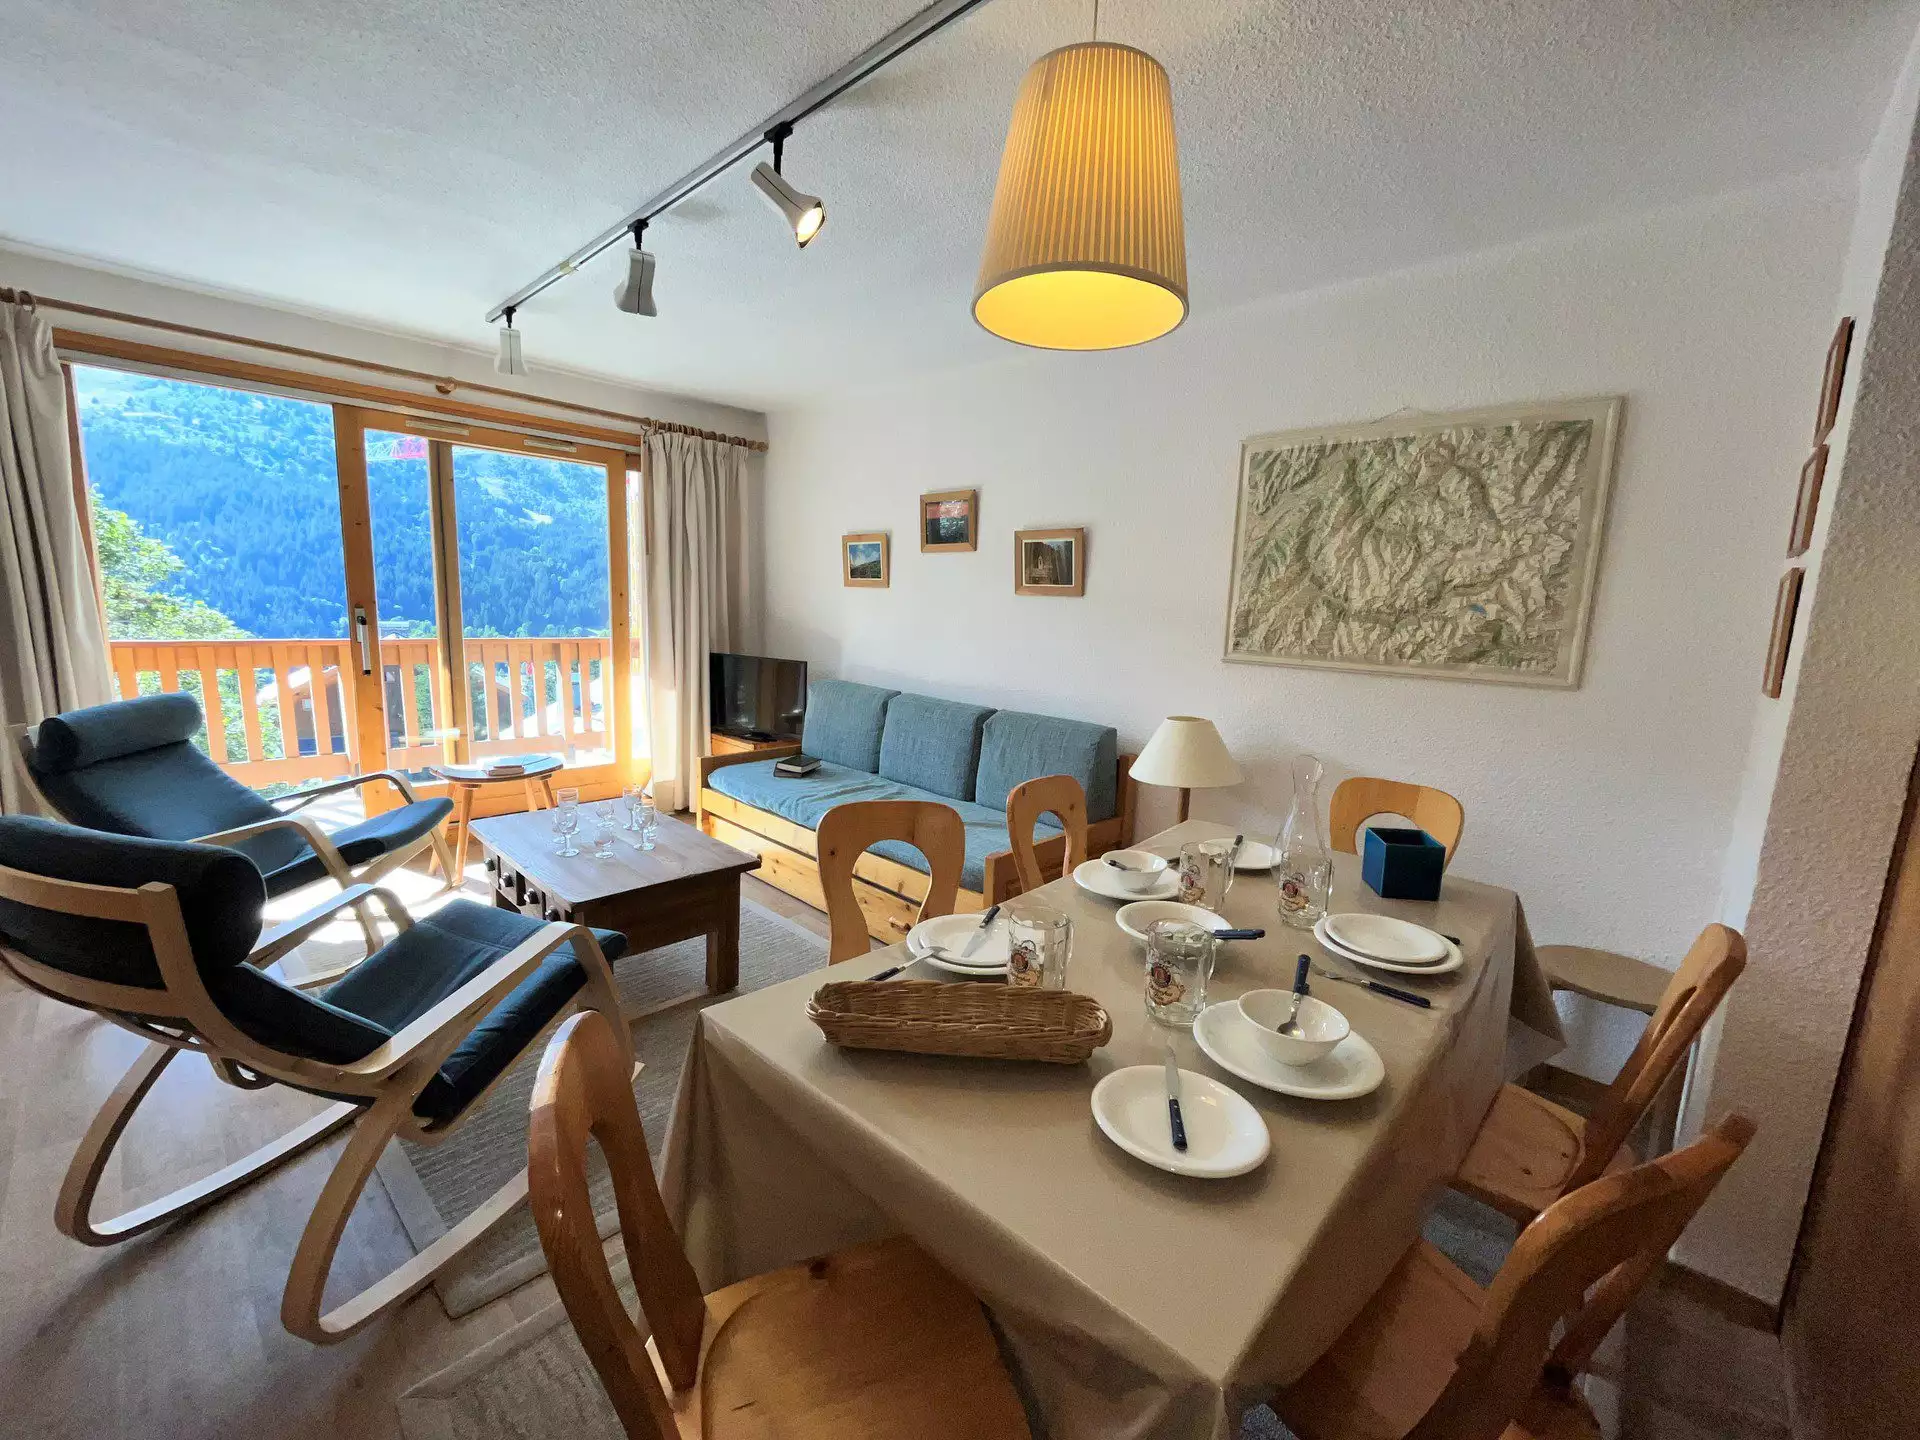 Functional and cosy apartment  Close to the slopes and shops  Mountain view